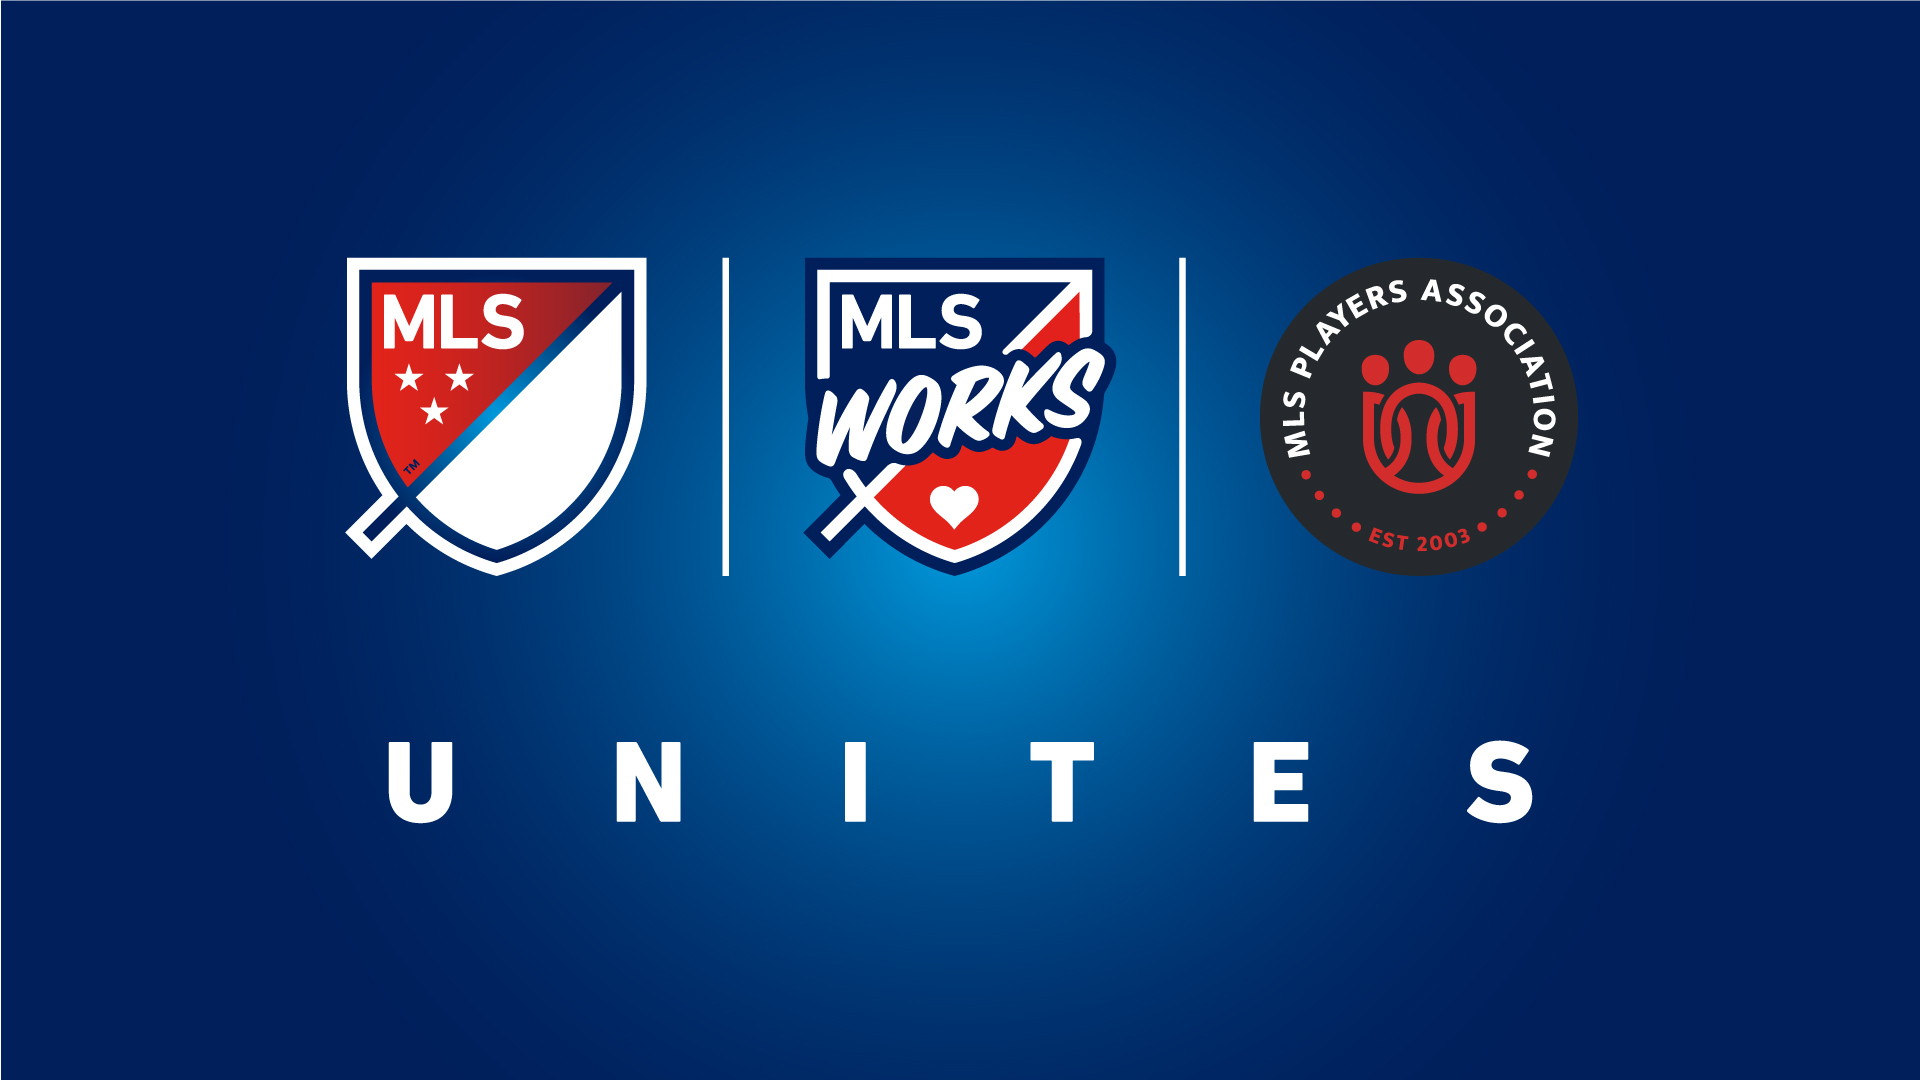 MLS Wallpaper With high-resolution 1920X1080 pixel. You can use this wallpaper for your Desktop Computers, Mac Screensavers, Windows Backgrounds, iPhone Wallpapers, Tablet or Android Lock screen and another Mobile device